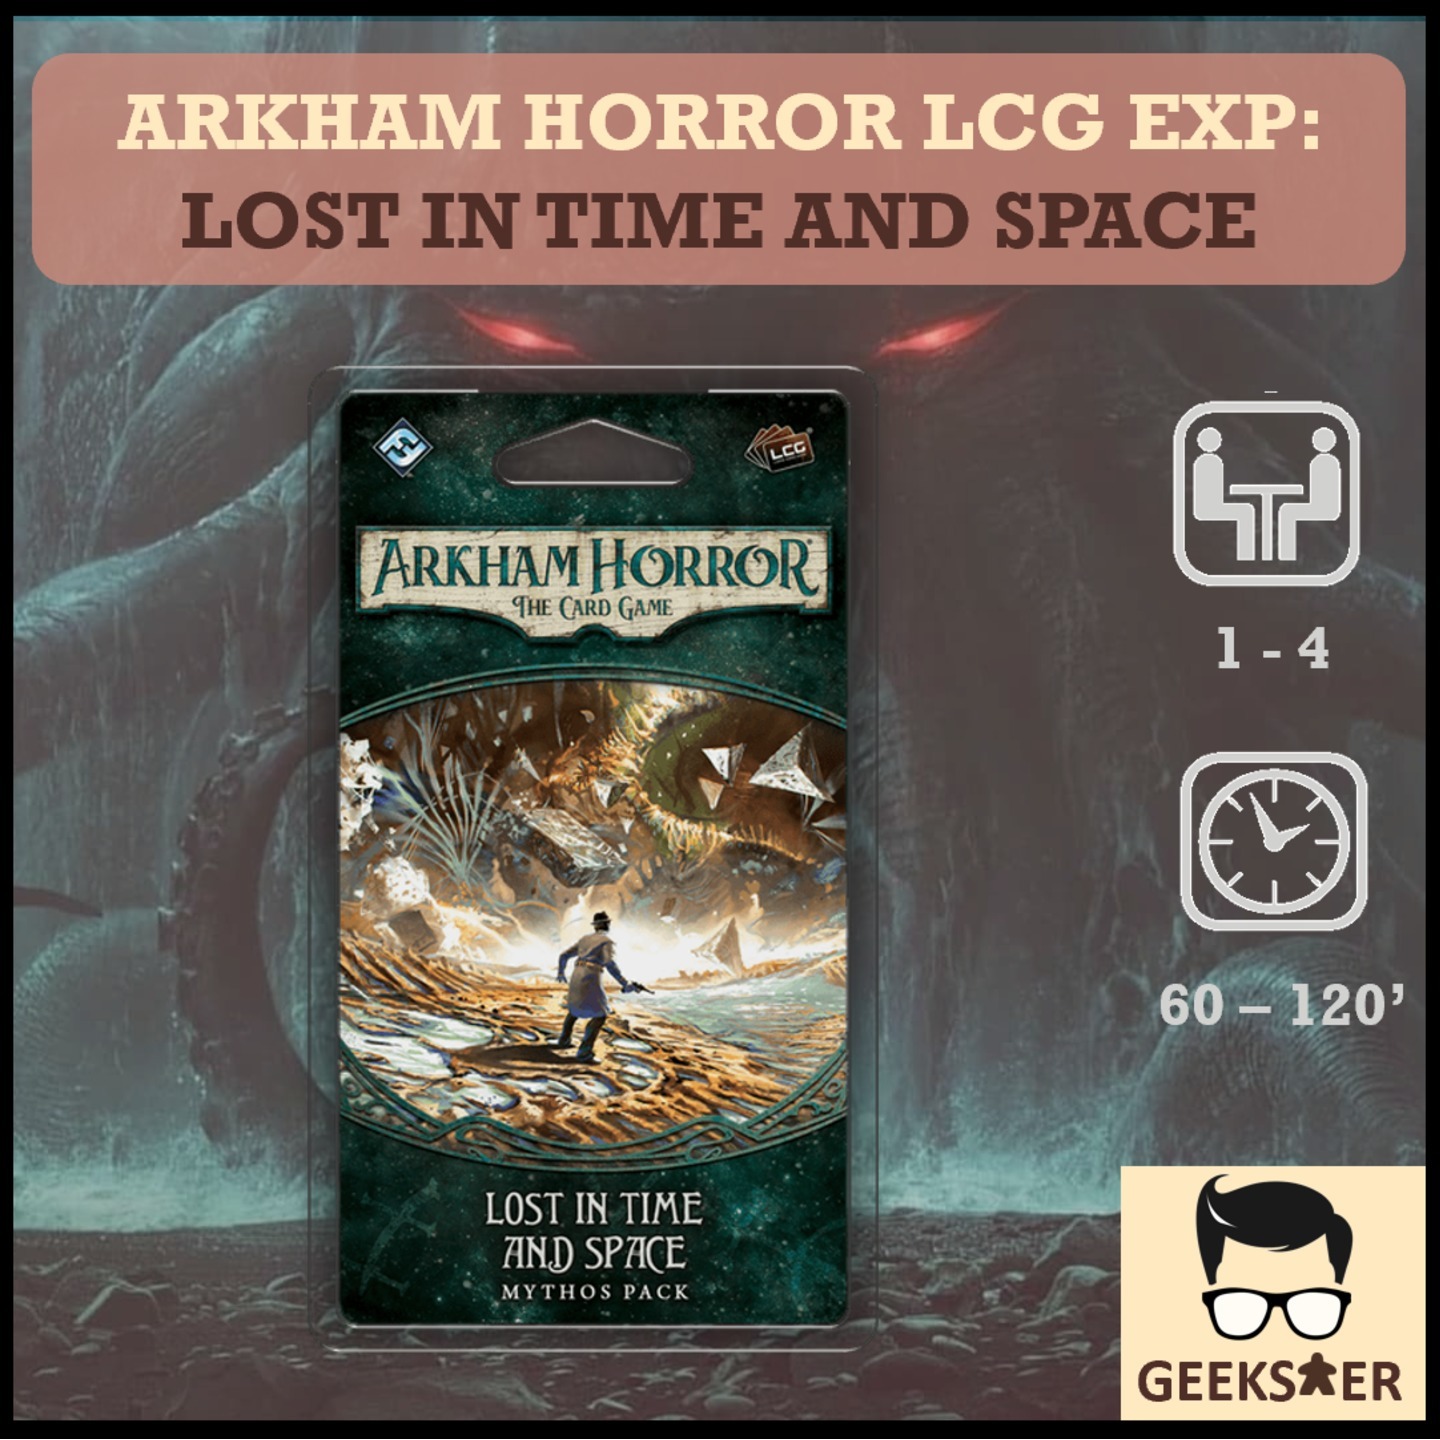 Arkham Horror LCG Exp  Lost in Time and Space